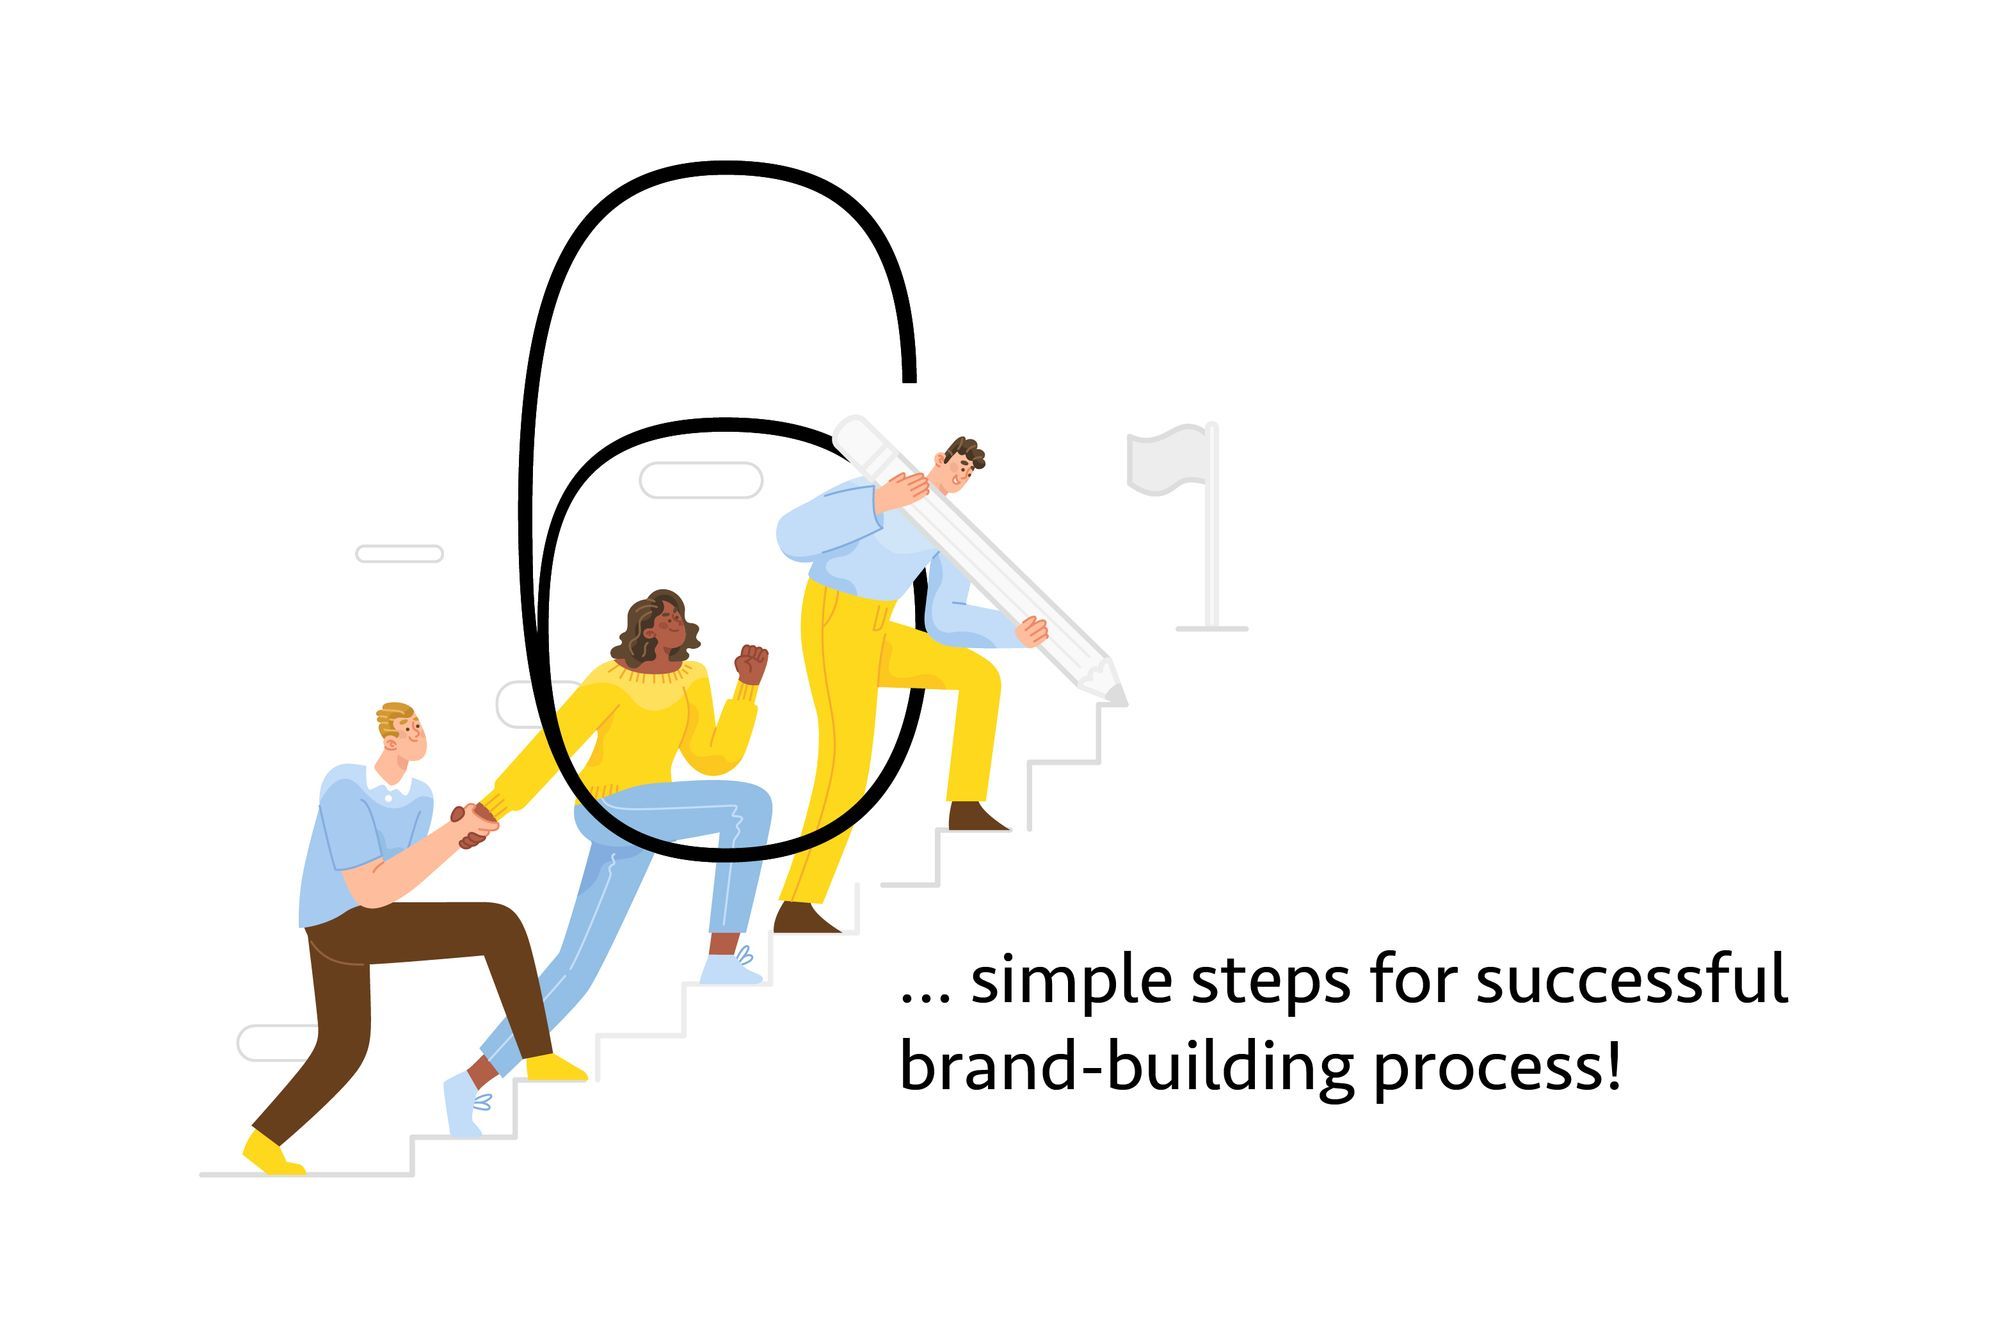 6 Simple Steps For Successful 
Brand-Building Process